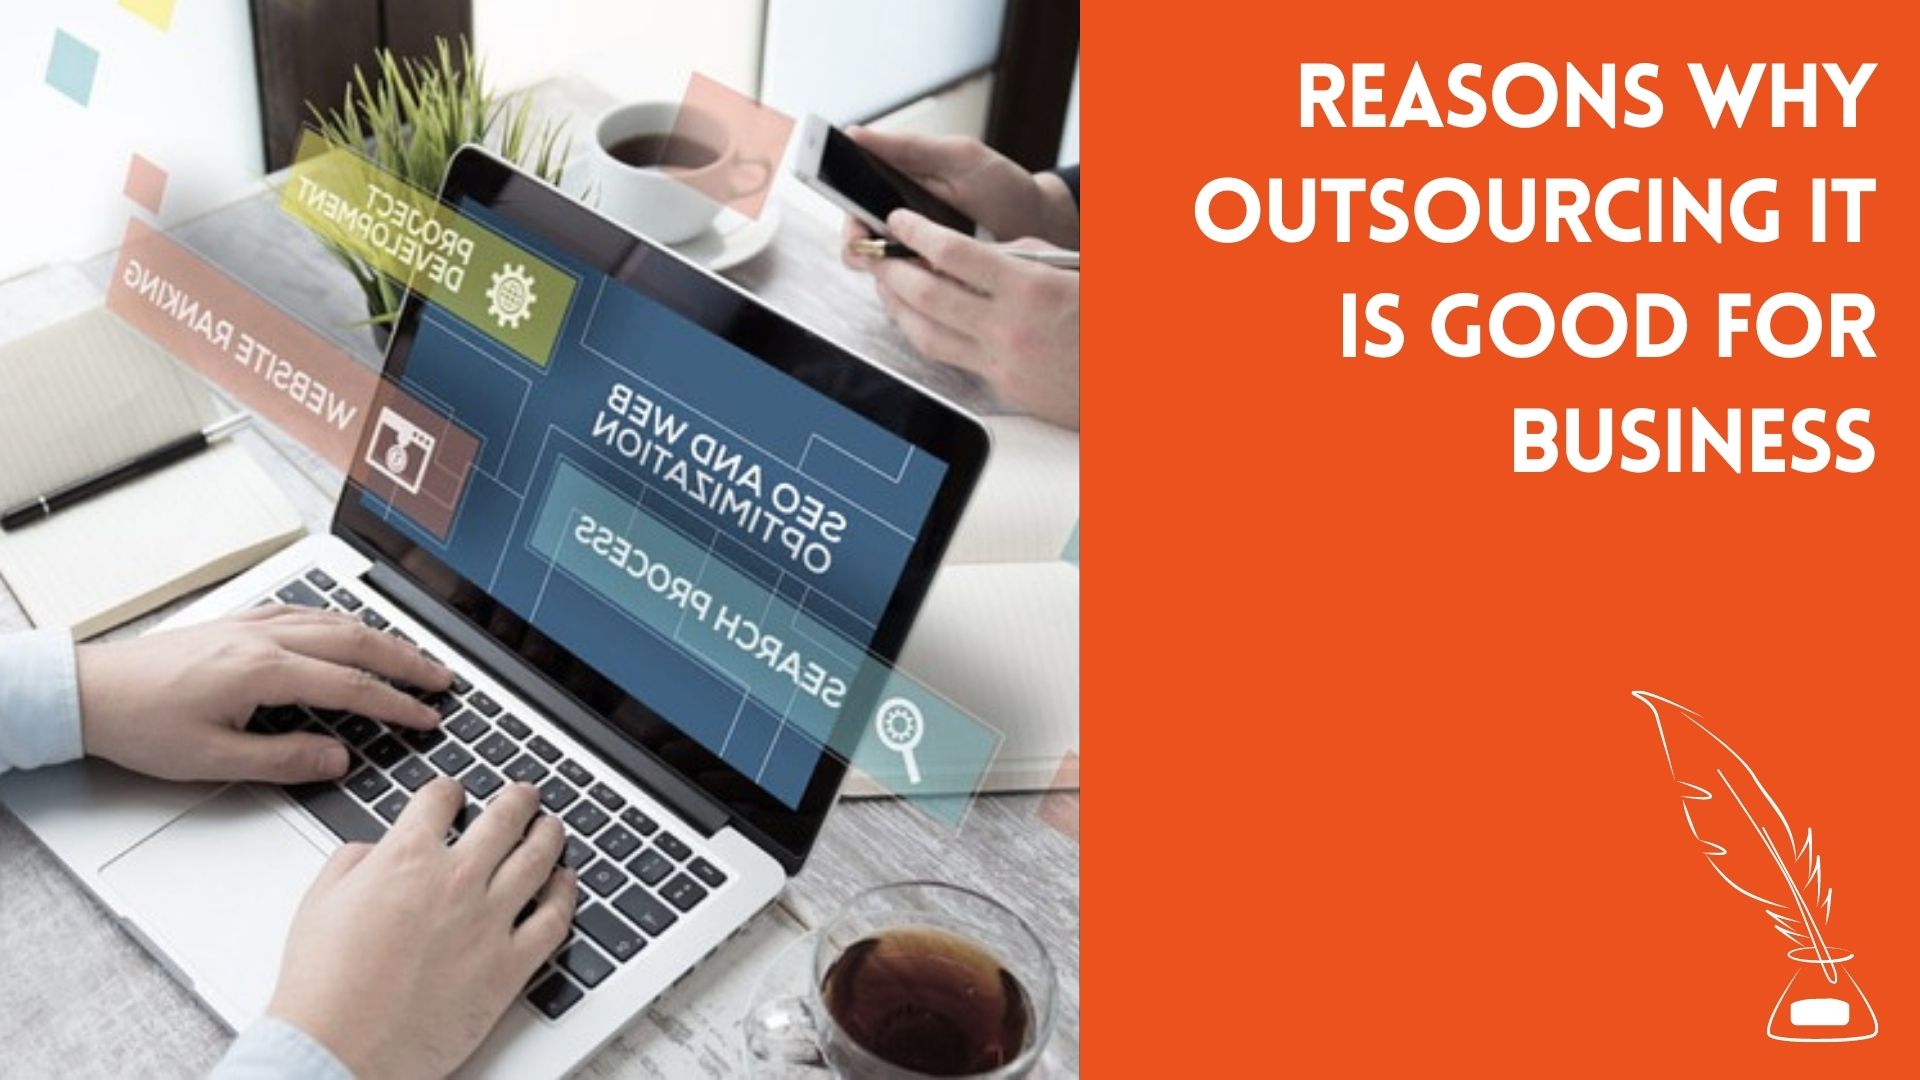 9 Reasons Why Outsourcing IT is Good for Business